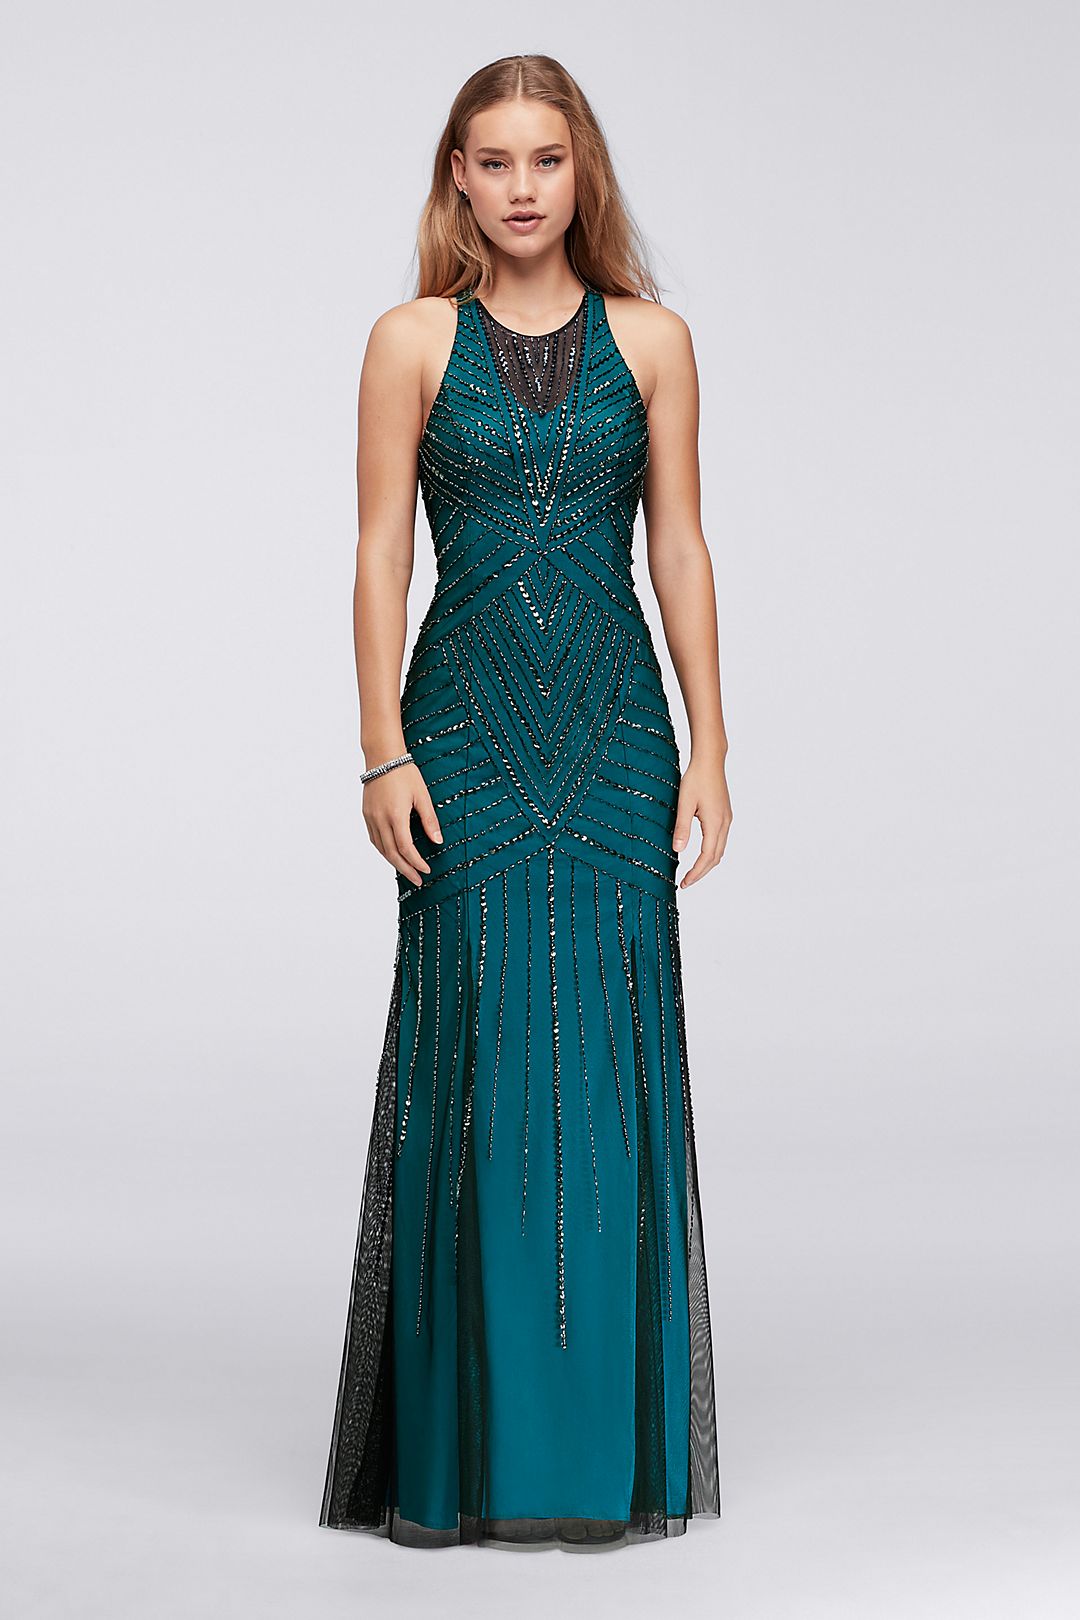 Illusion Sheath Gown with Allover Deco Beading Image 1